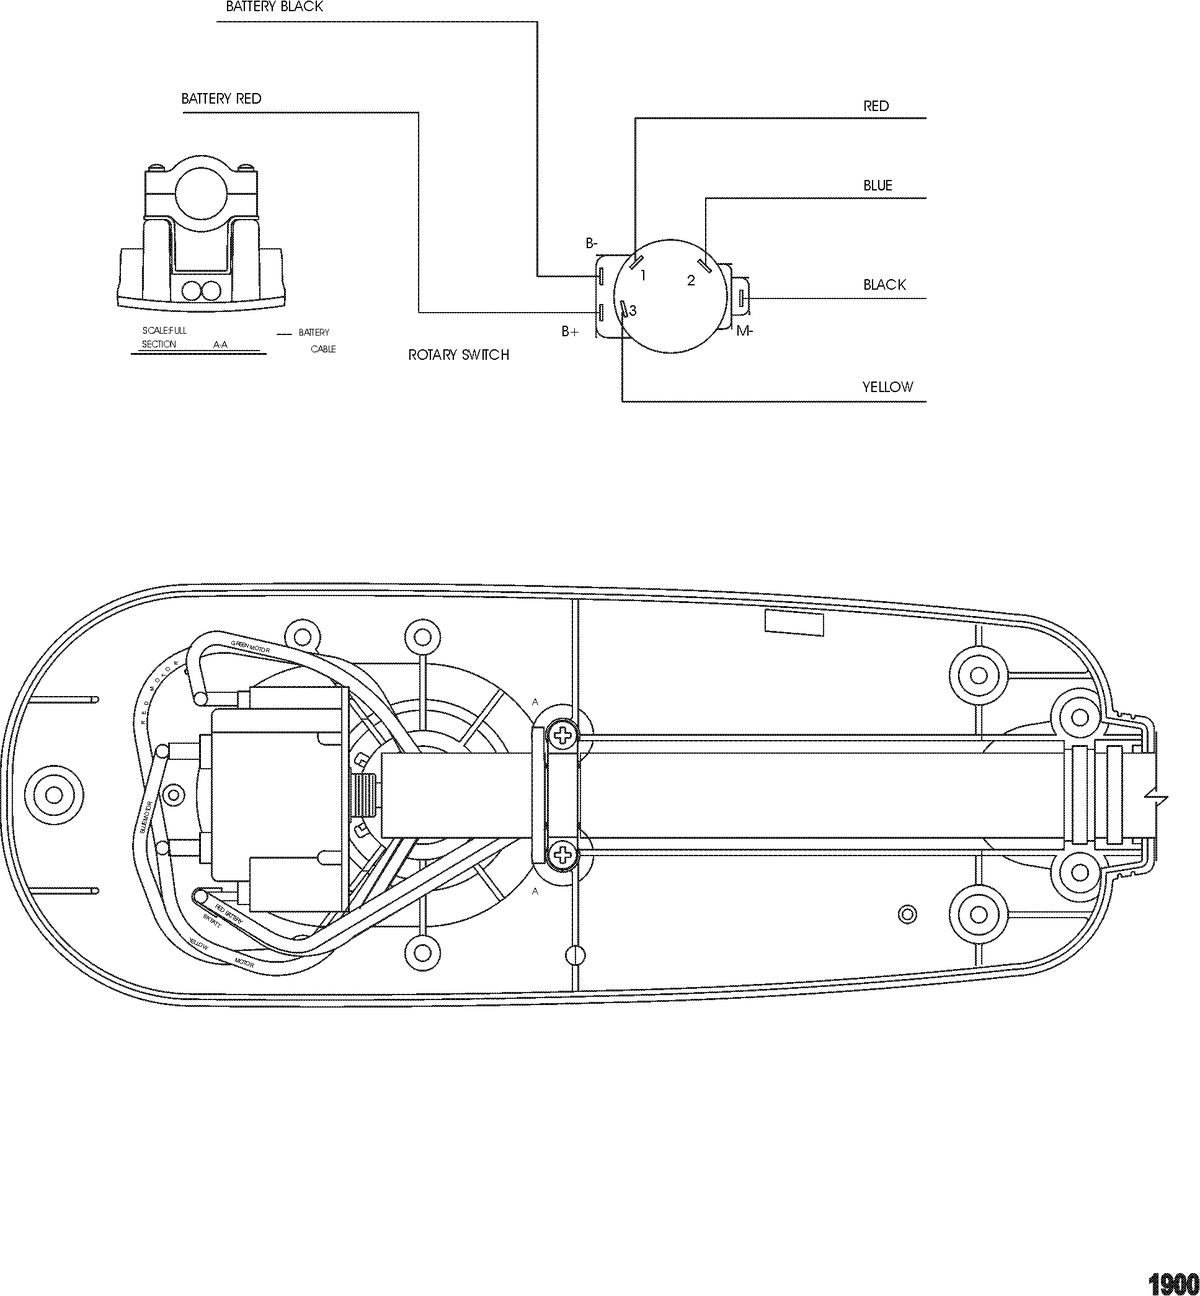 TROLLING MOTOR MOTORGUIDE THRUSTER SERIES Wire Diagram(Model T25) (Without Quick Connect)